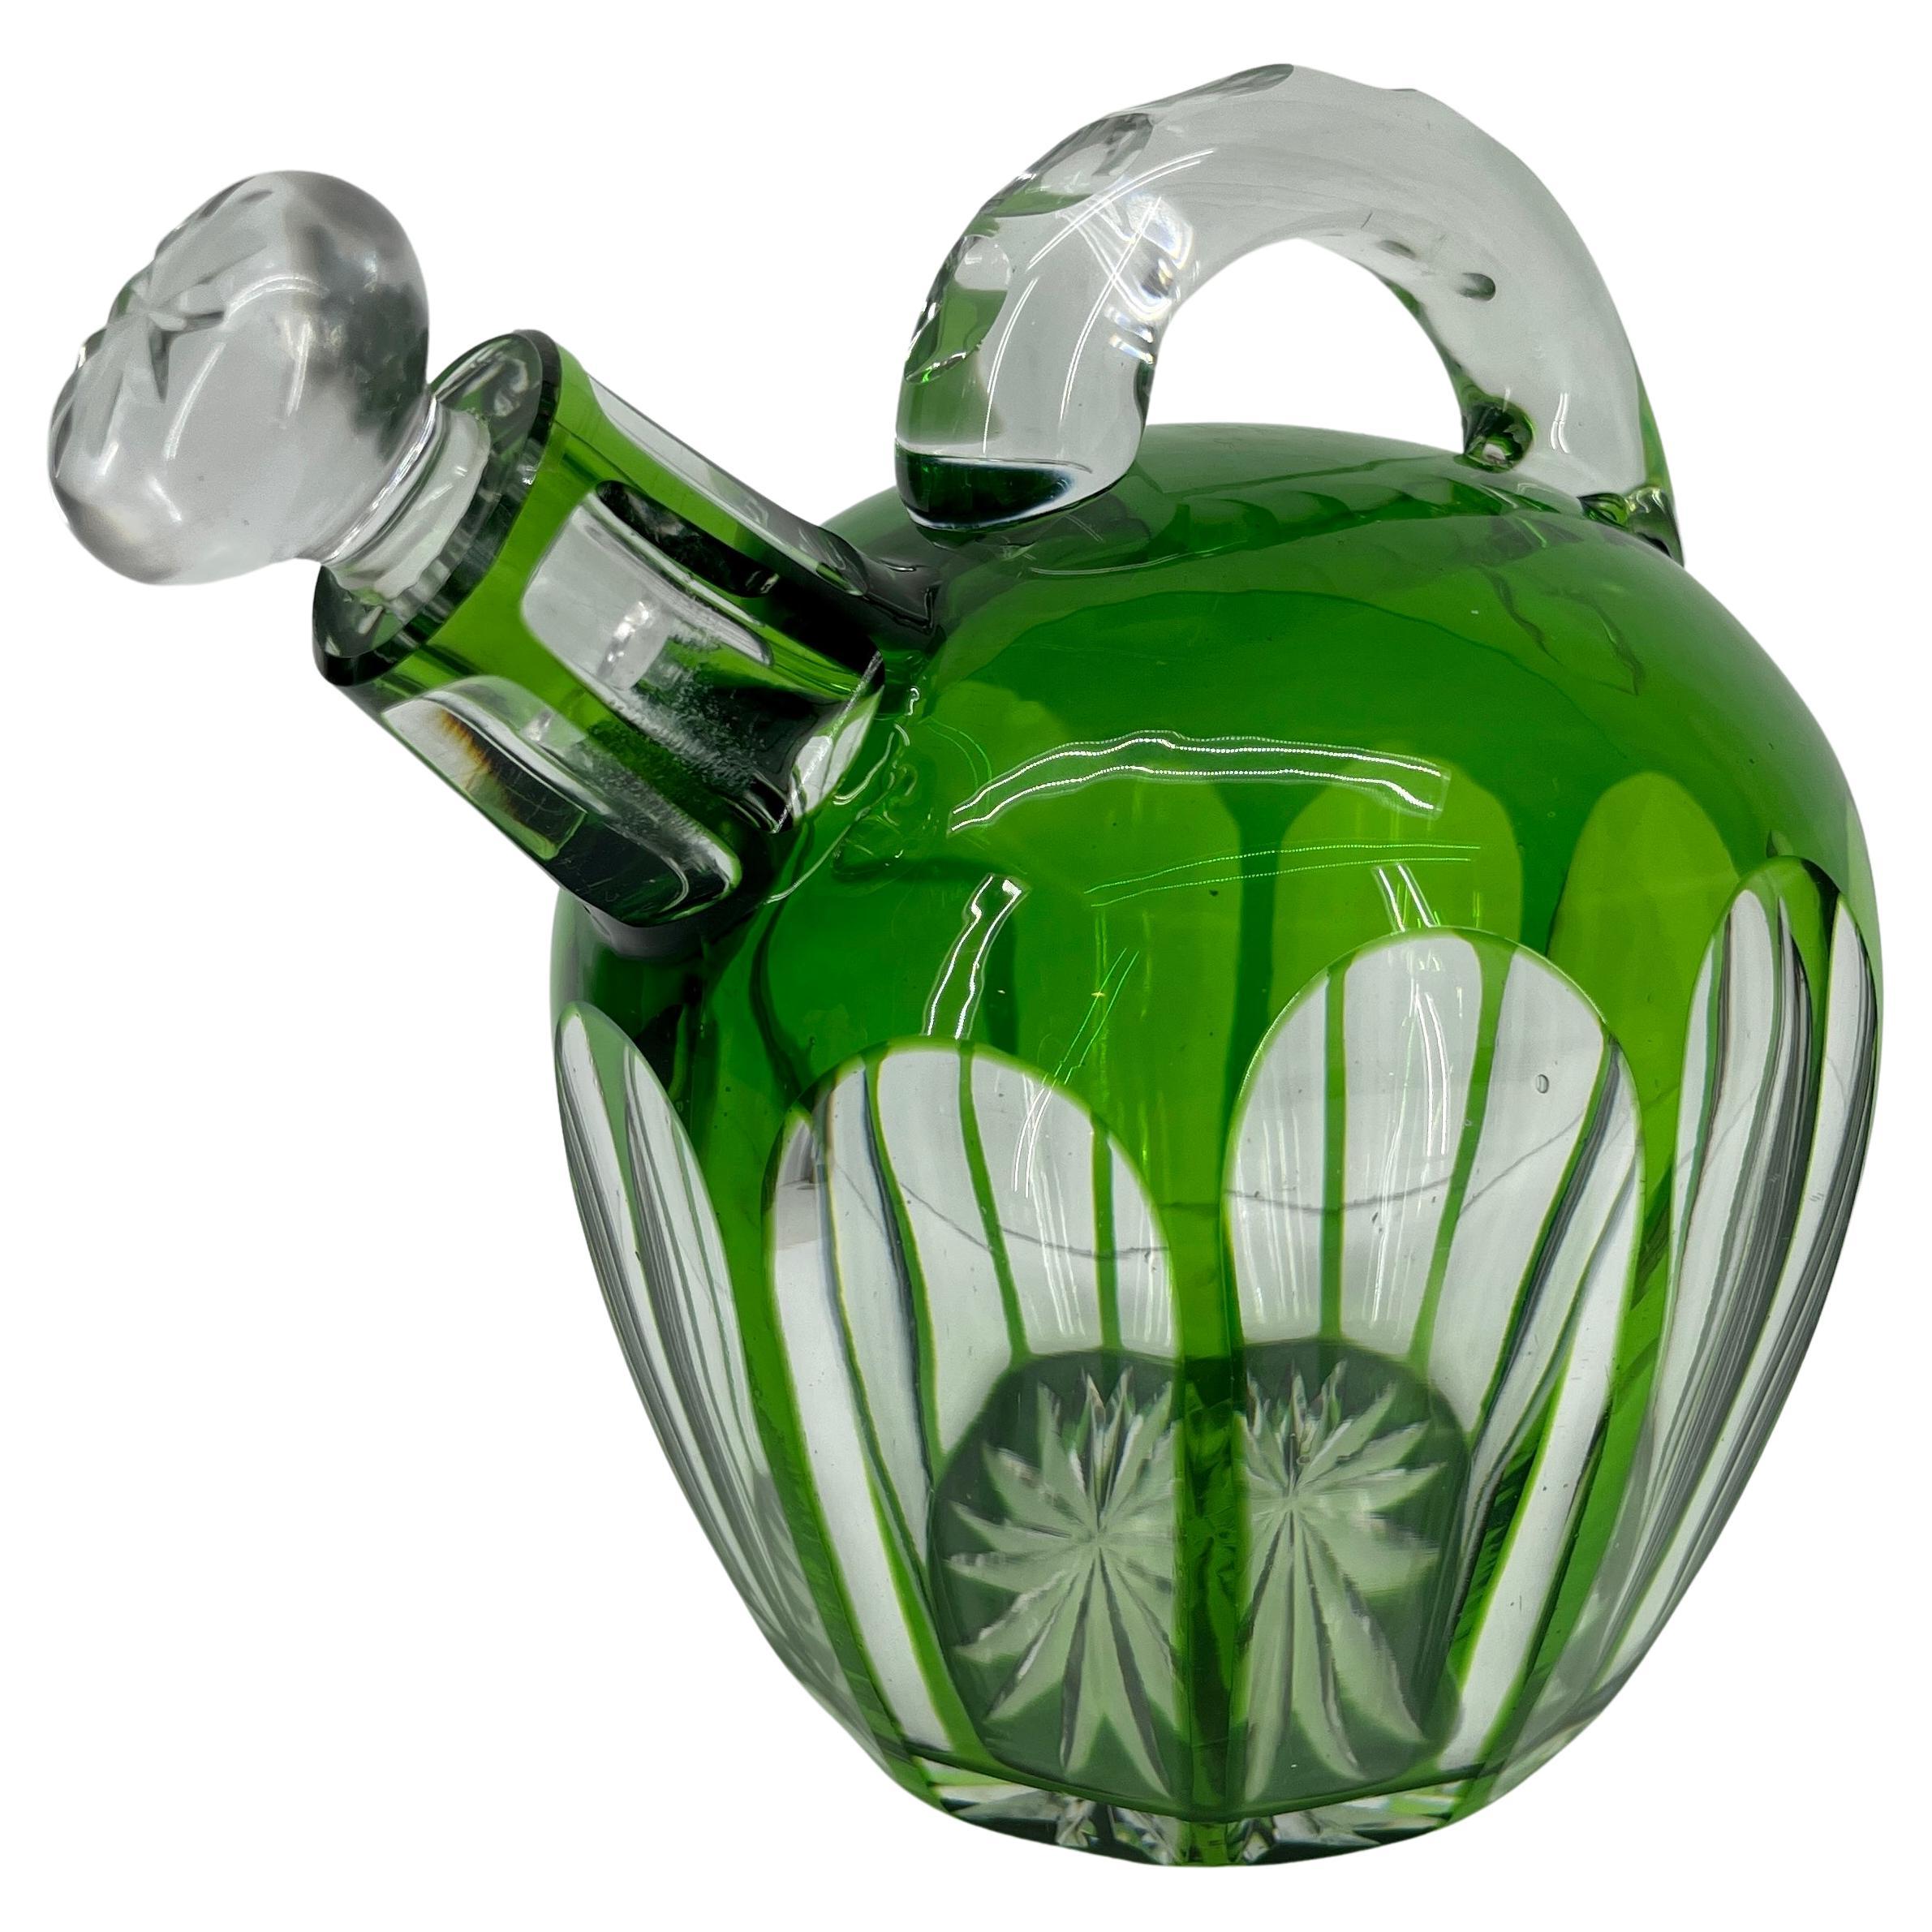 Art Deco Bohemian cut glass decanter with stopper. This beautiful glass decanter is high quality; striking green to clear glass. The glass is overlaid with gorgeous green throughout the body as well as the starburst pattern on bottom and beveled